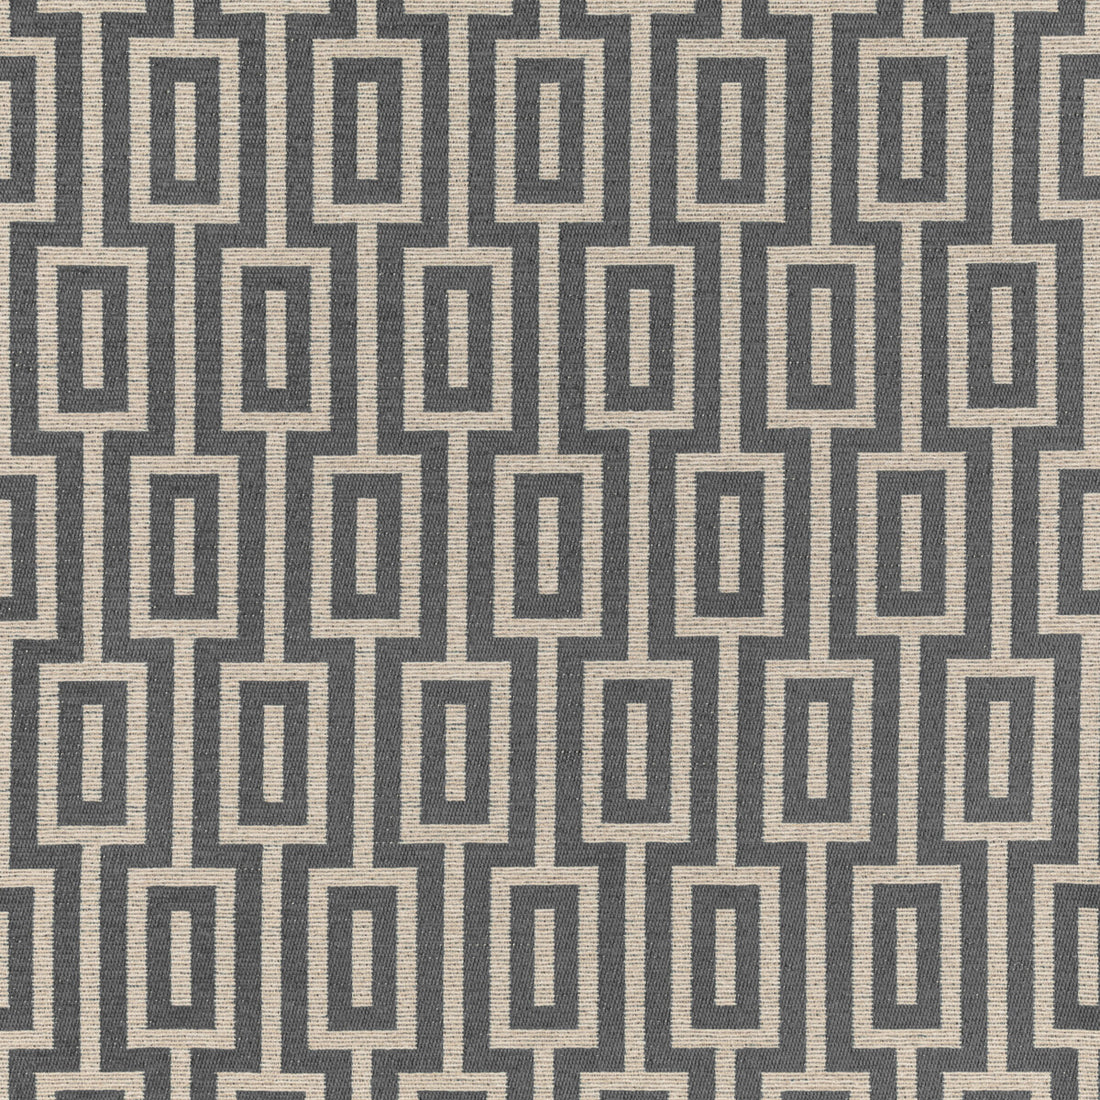 Street Key fabric in iron color - pattern 36280.1611.0 - by Kravet Contract in the Gis Crypton collection